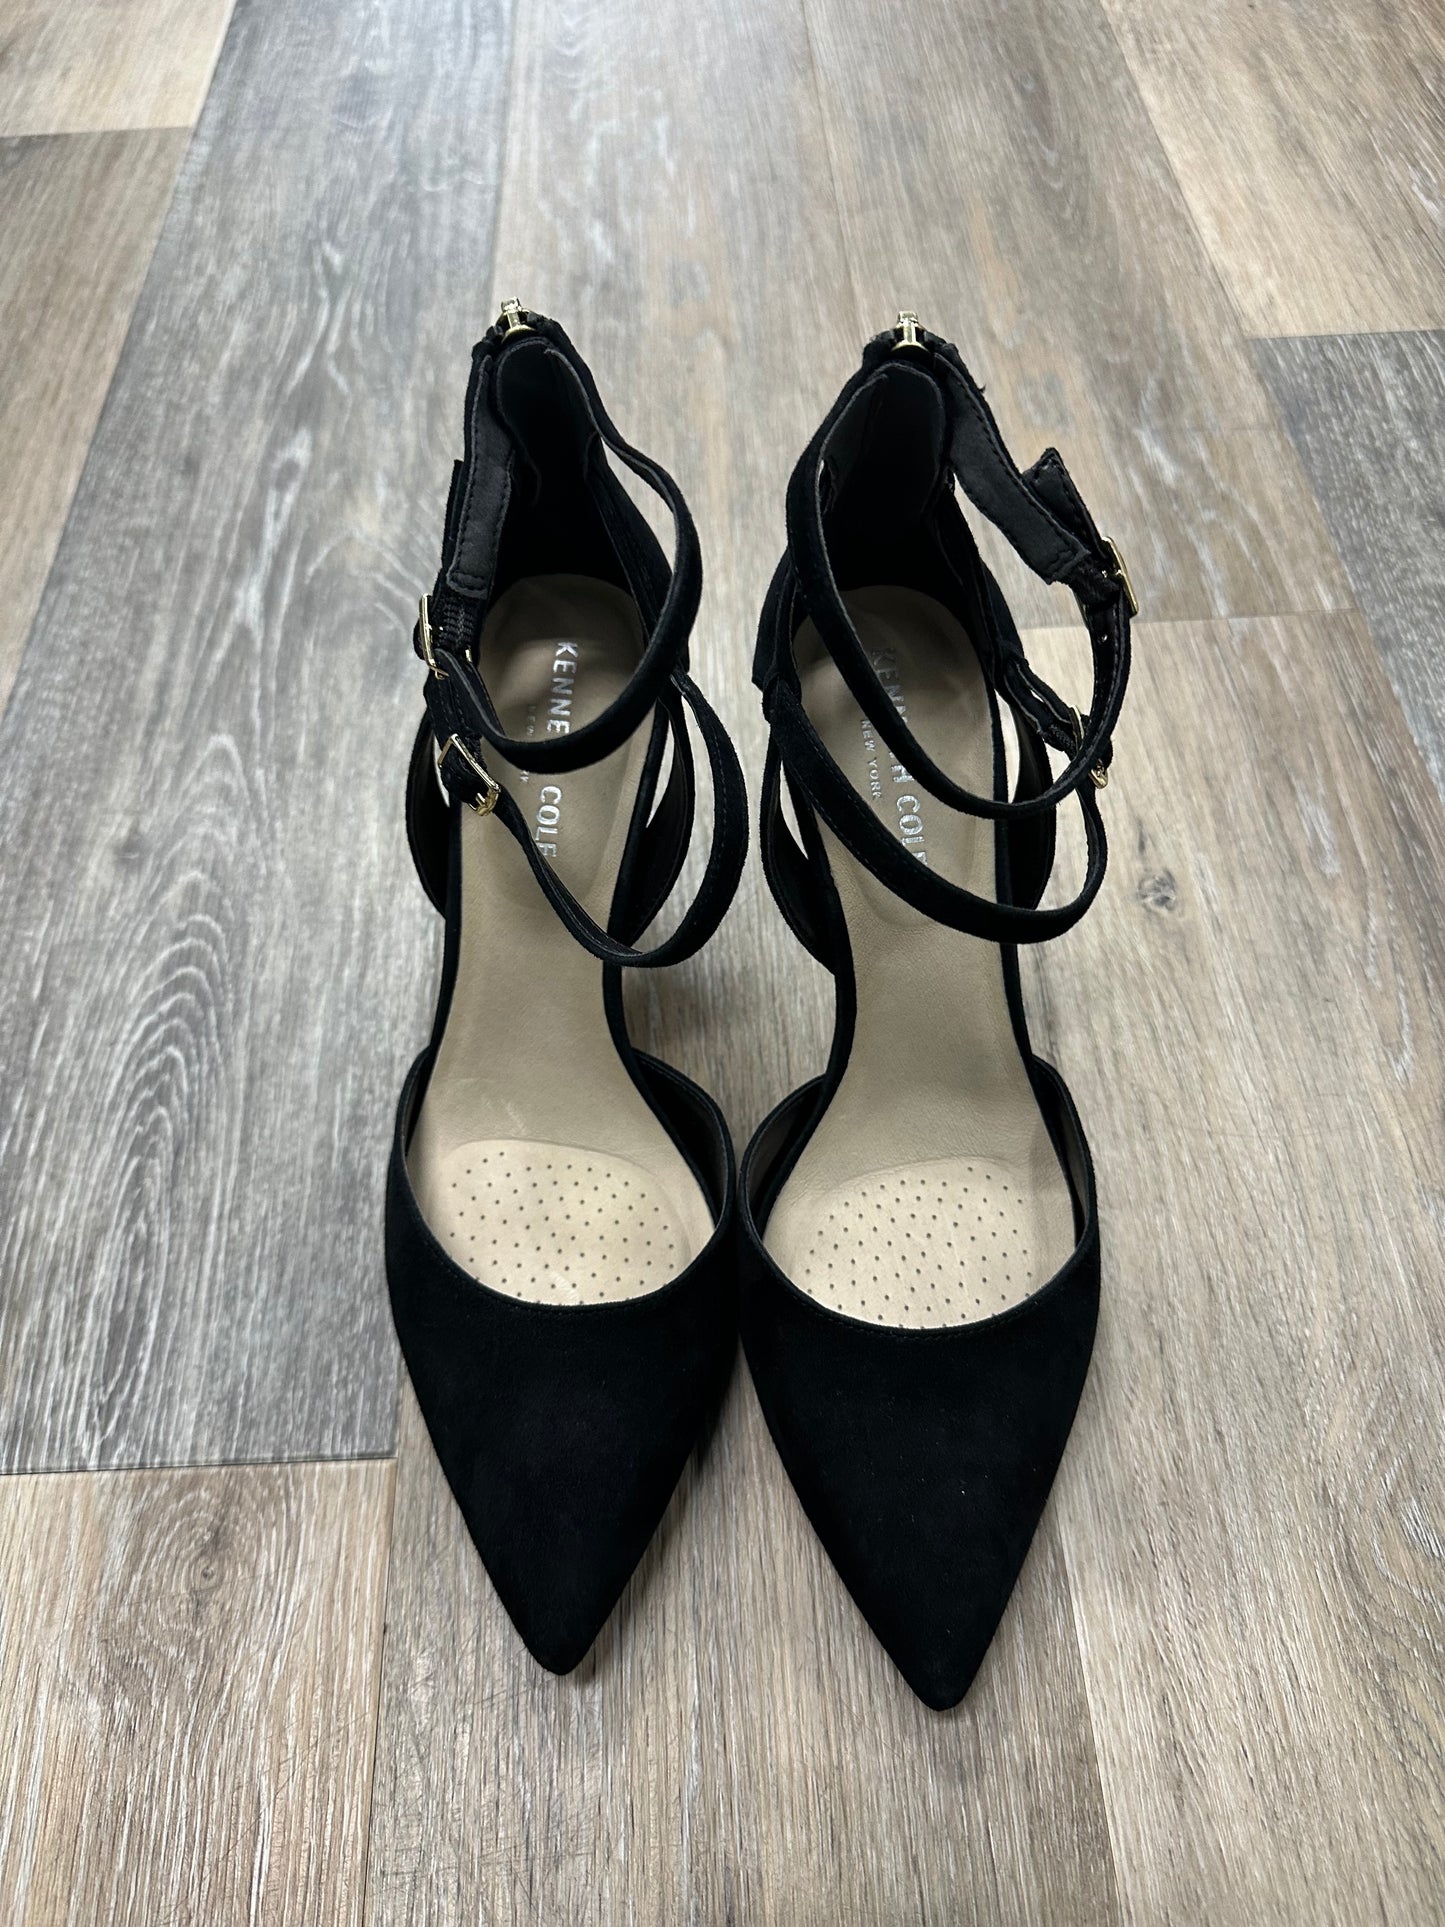 Shoes Heels Stiletto By Kenneth Cole  Size: 8